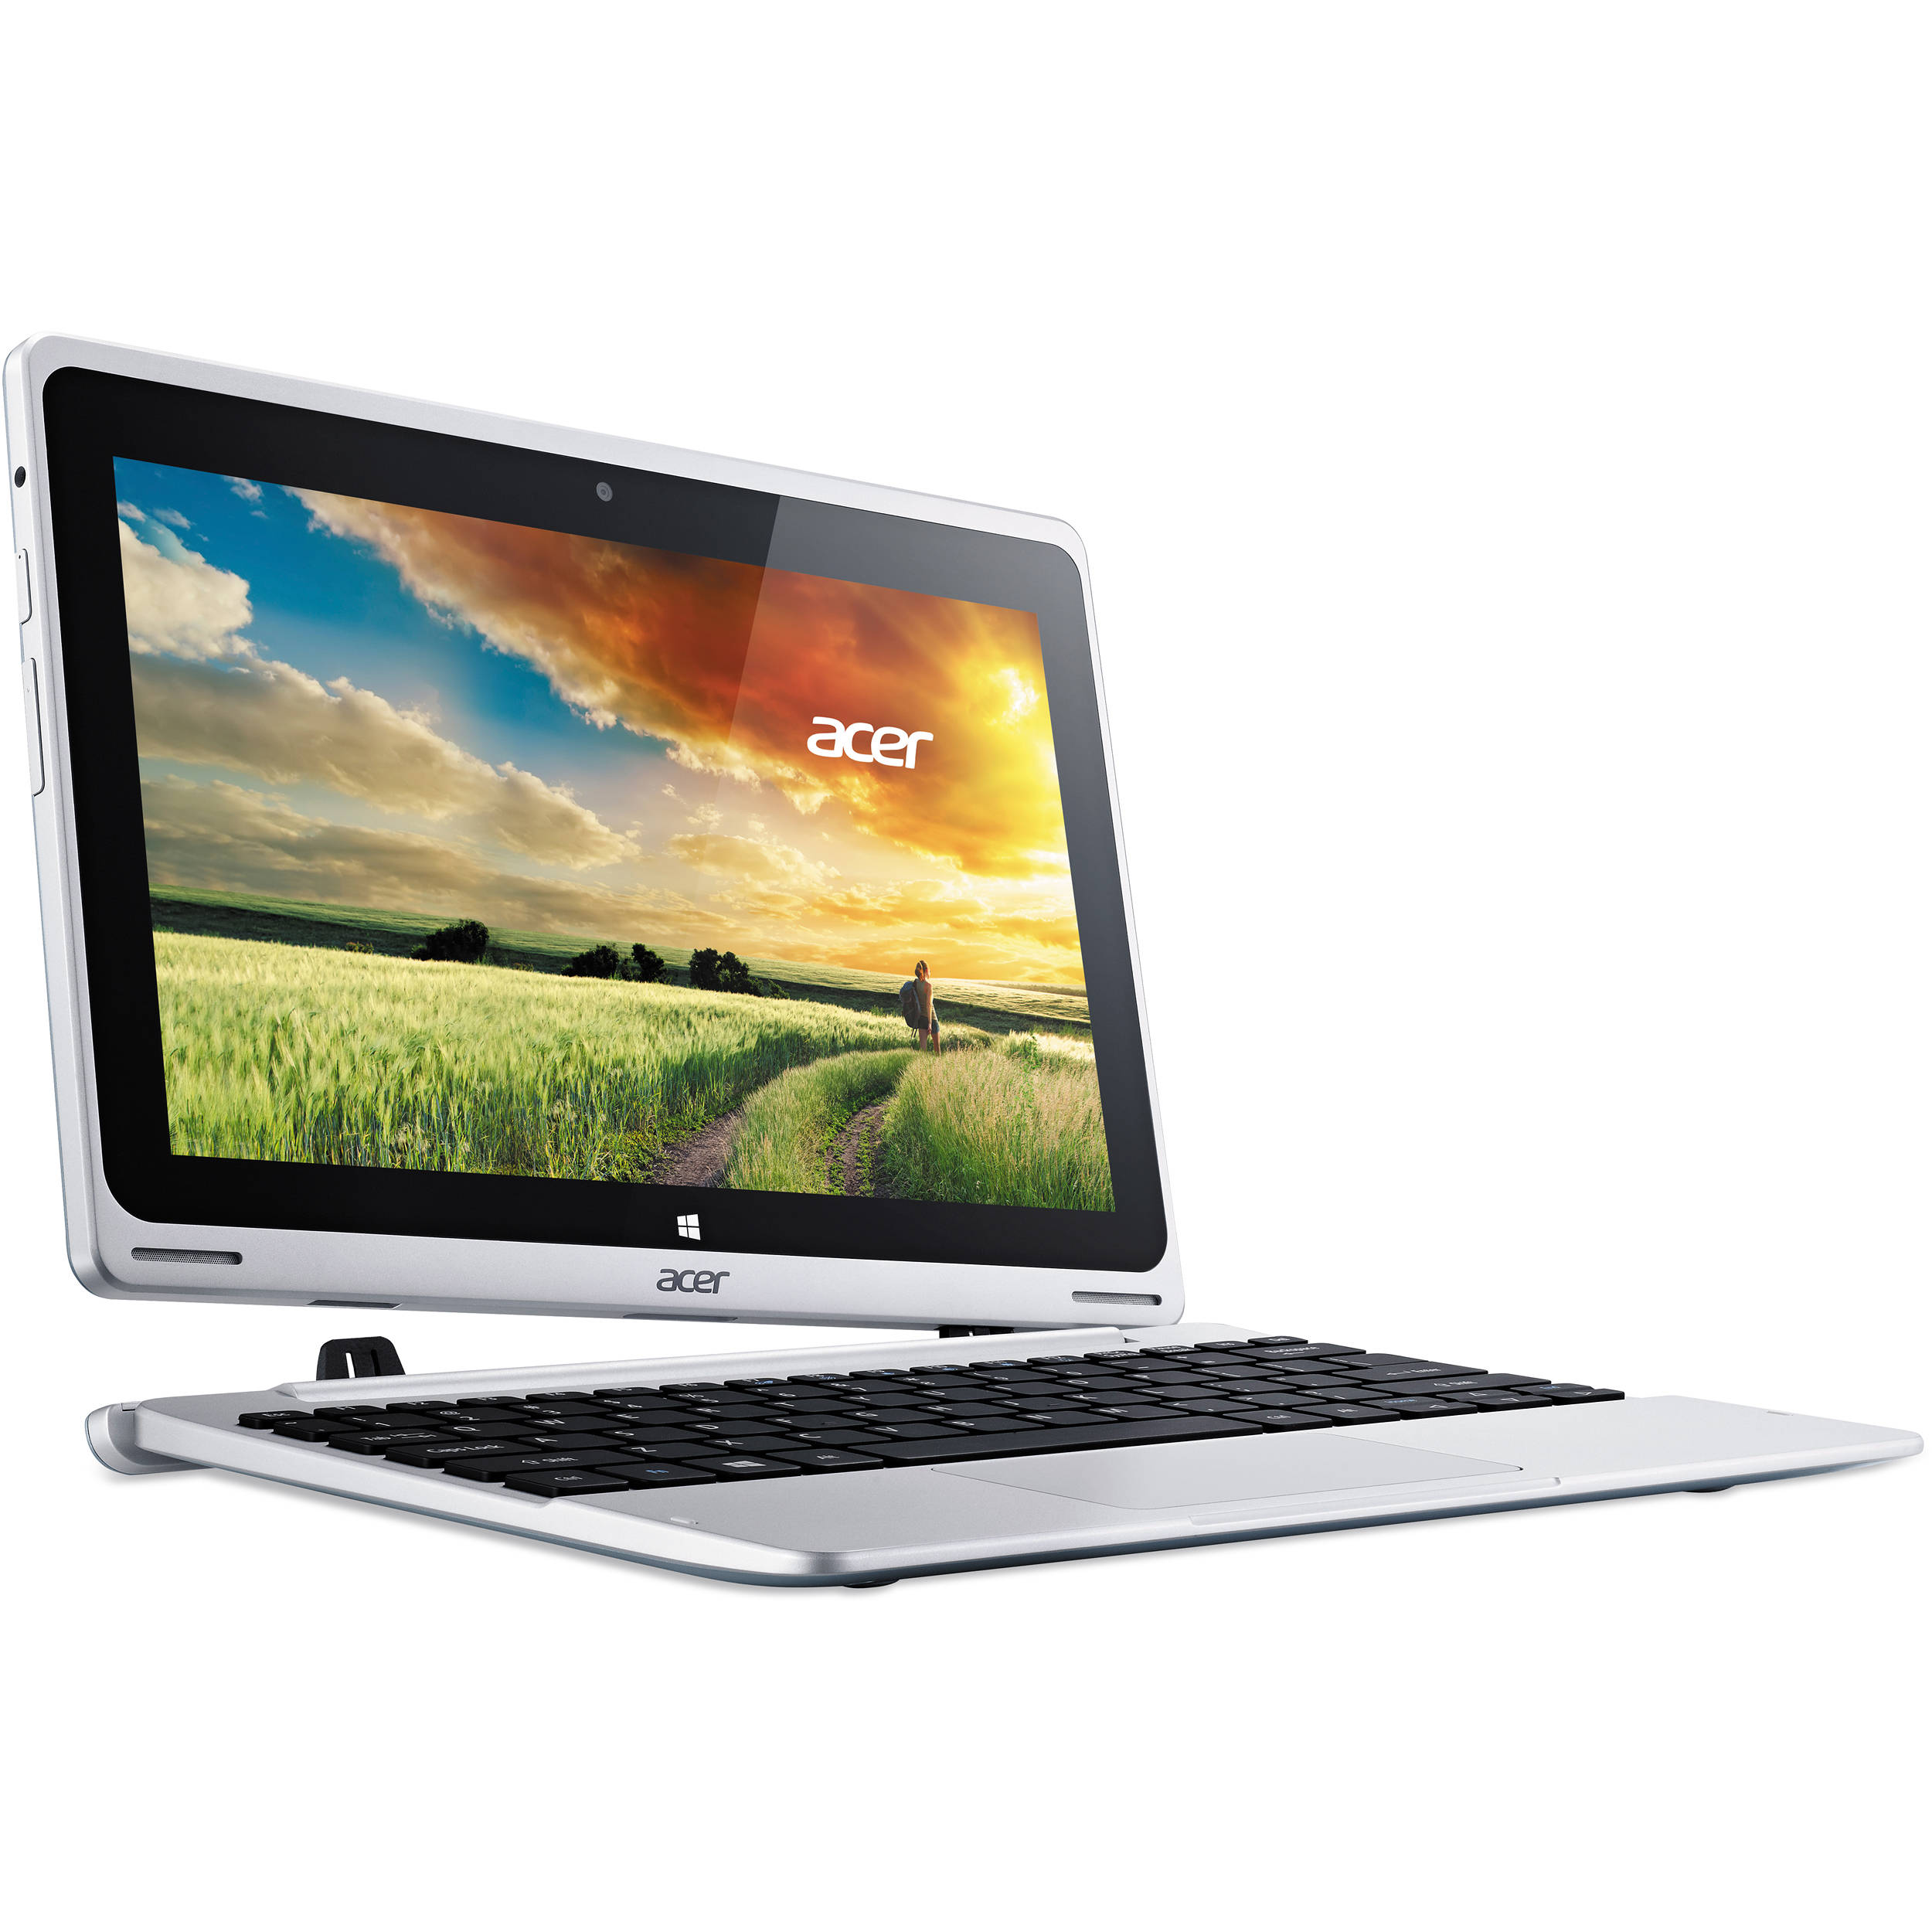 Acer aspire switch 10 e 101 2 in 1 review Acer Aspire Switch 10 Sw5 011 18r3 10 1 2 In 1 Nt L47aa 001 B H